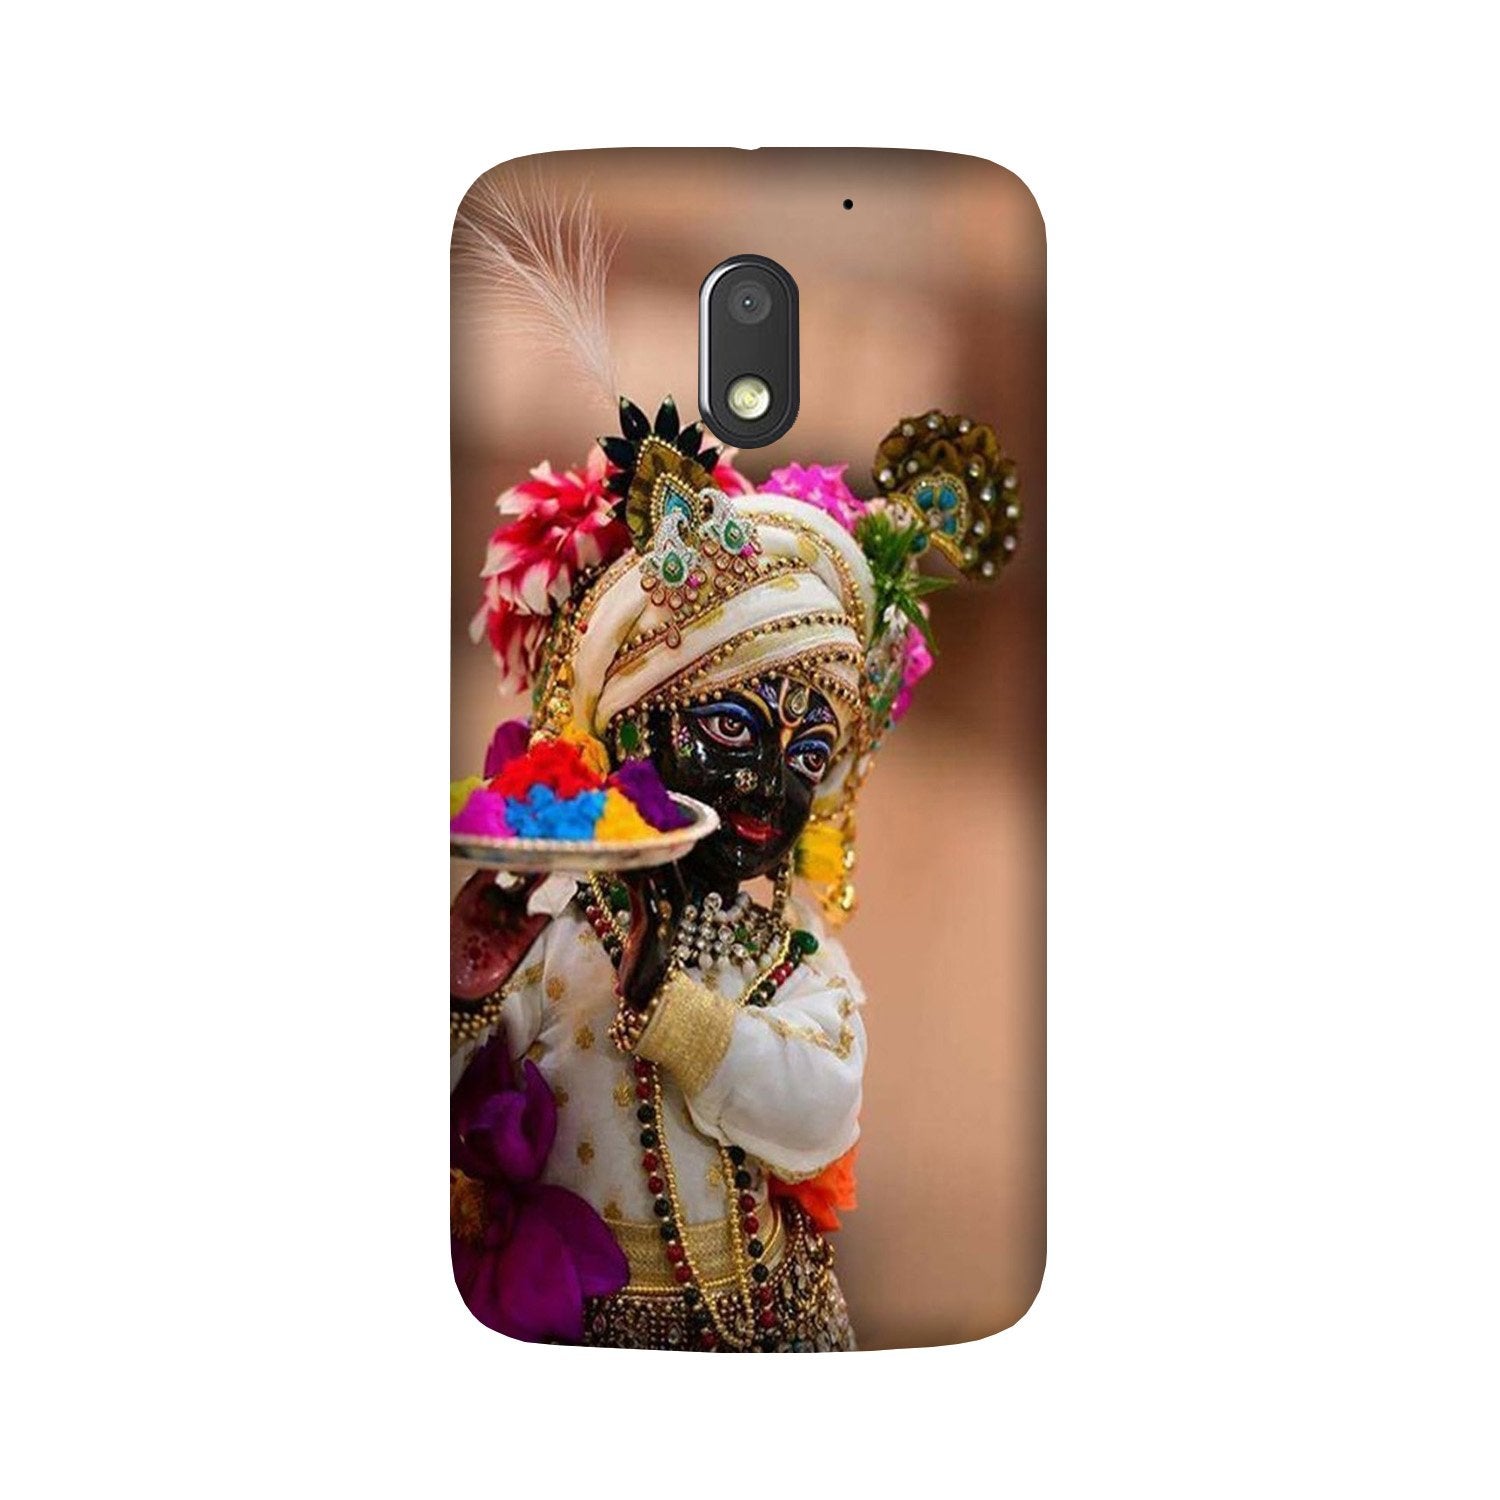 Lord Krishna2 Case for Moto G4 Play